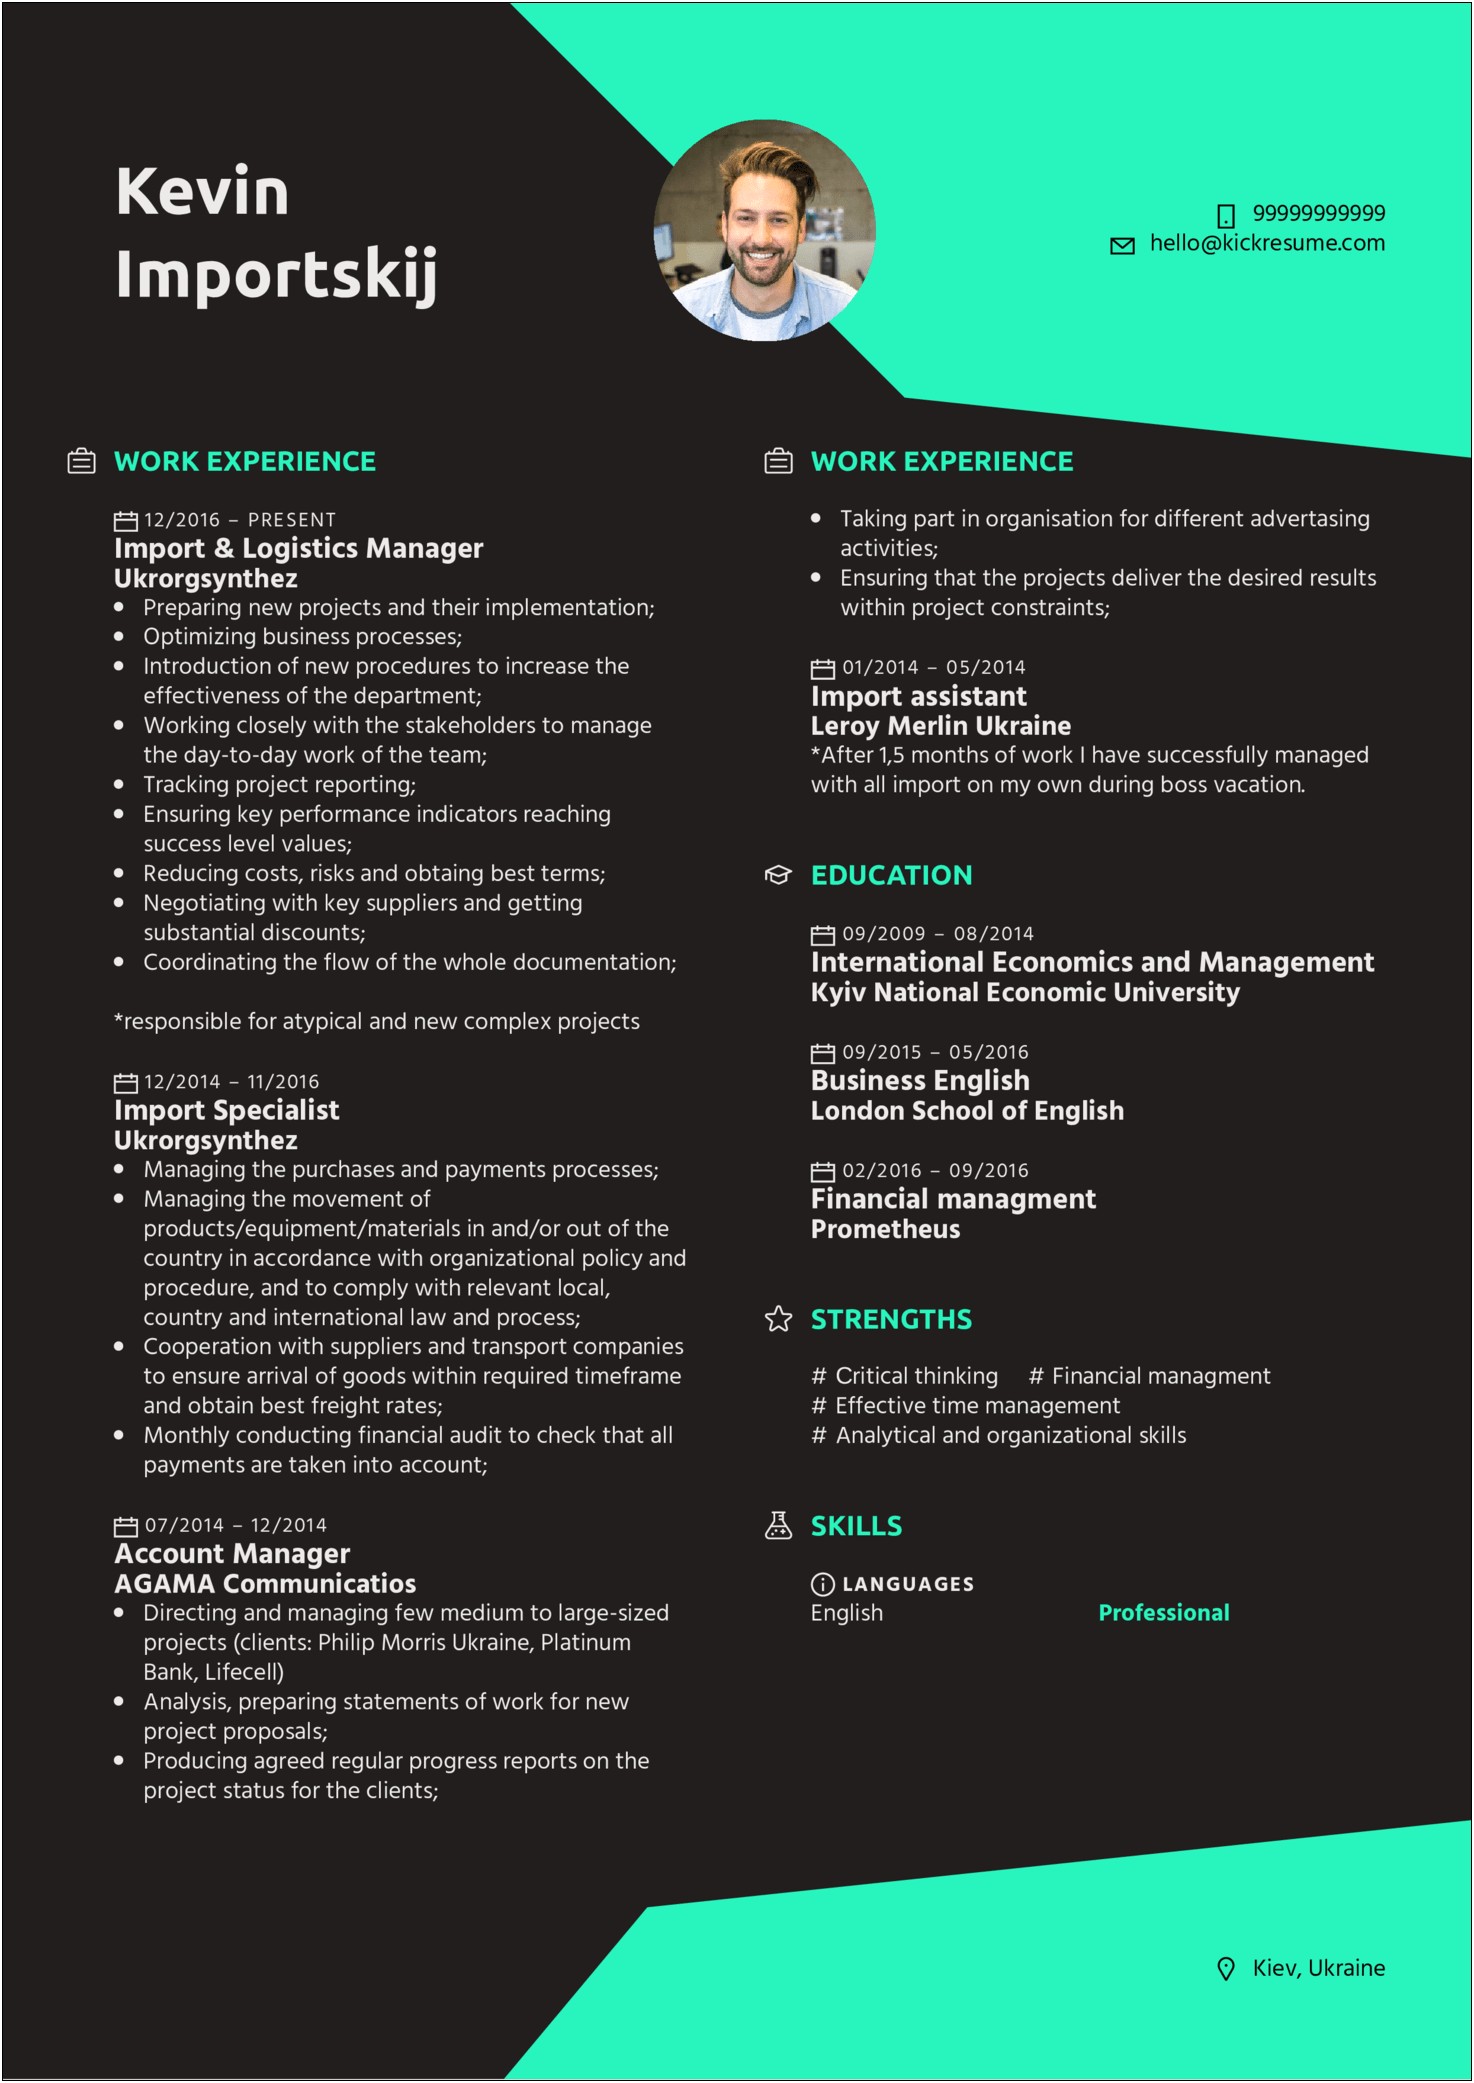 Resume Template With Qualifictions Statemnt And Photo